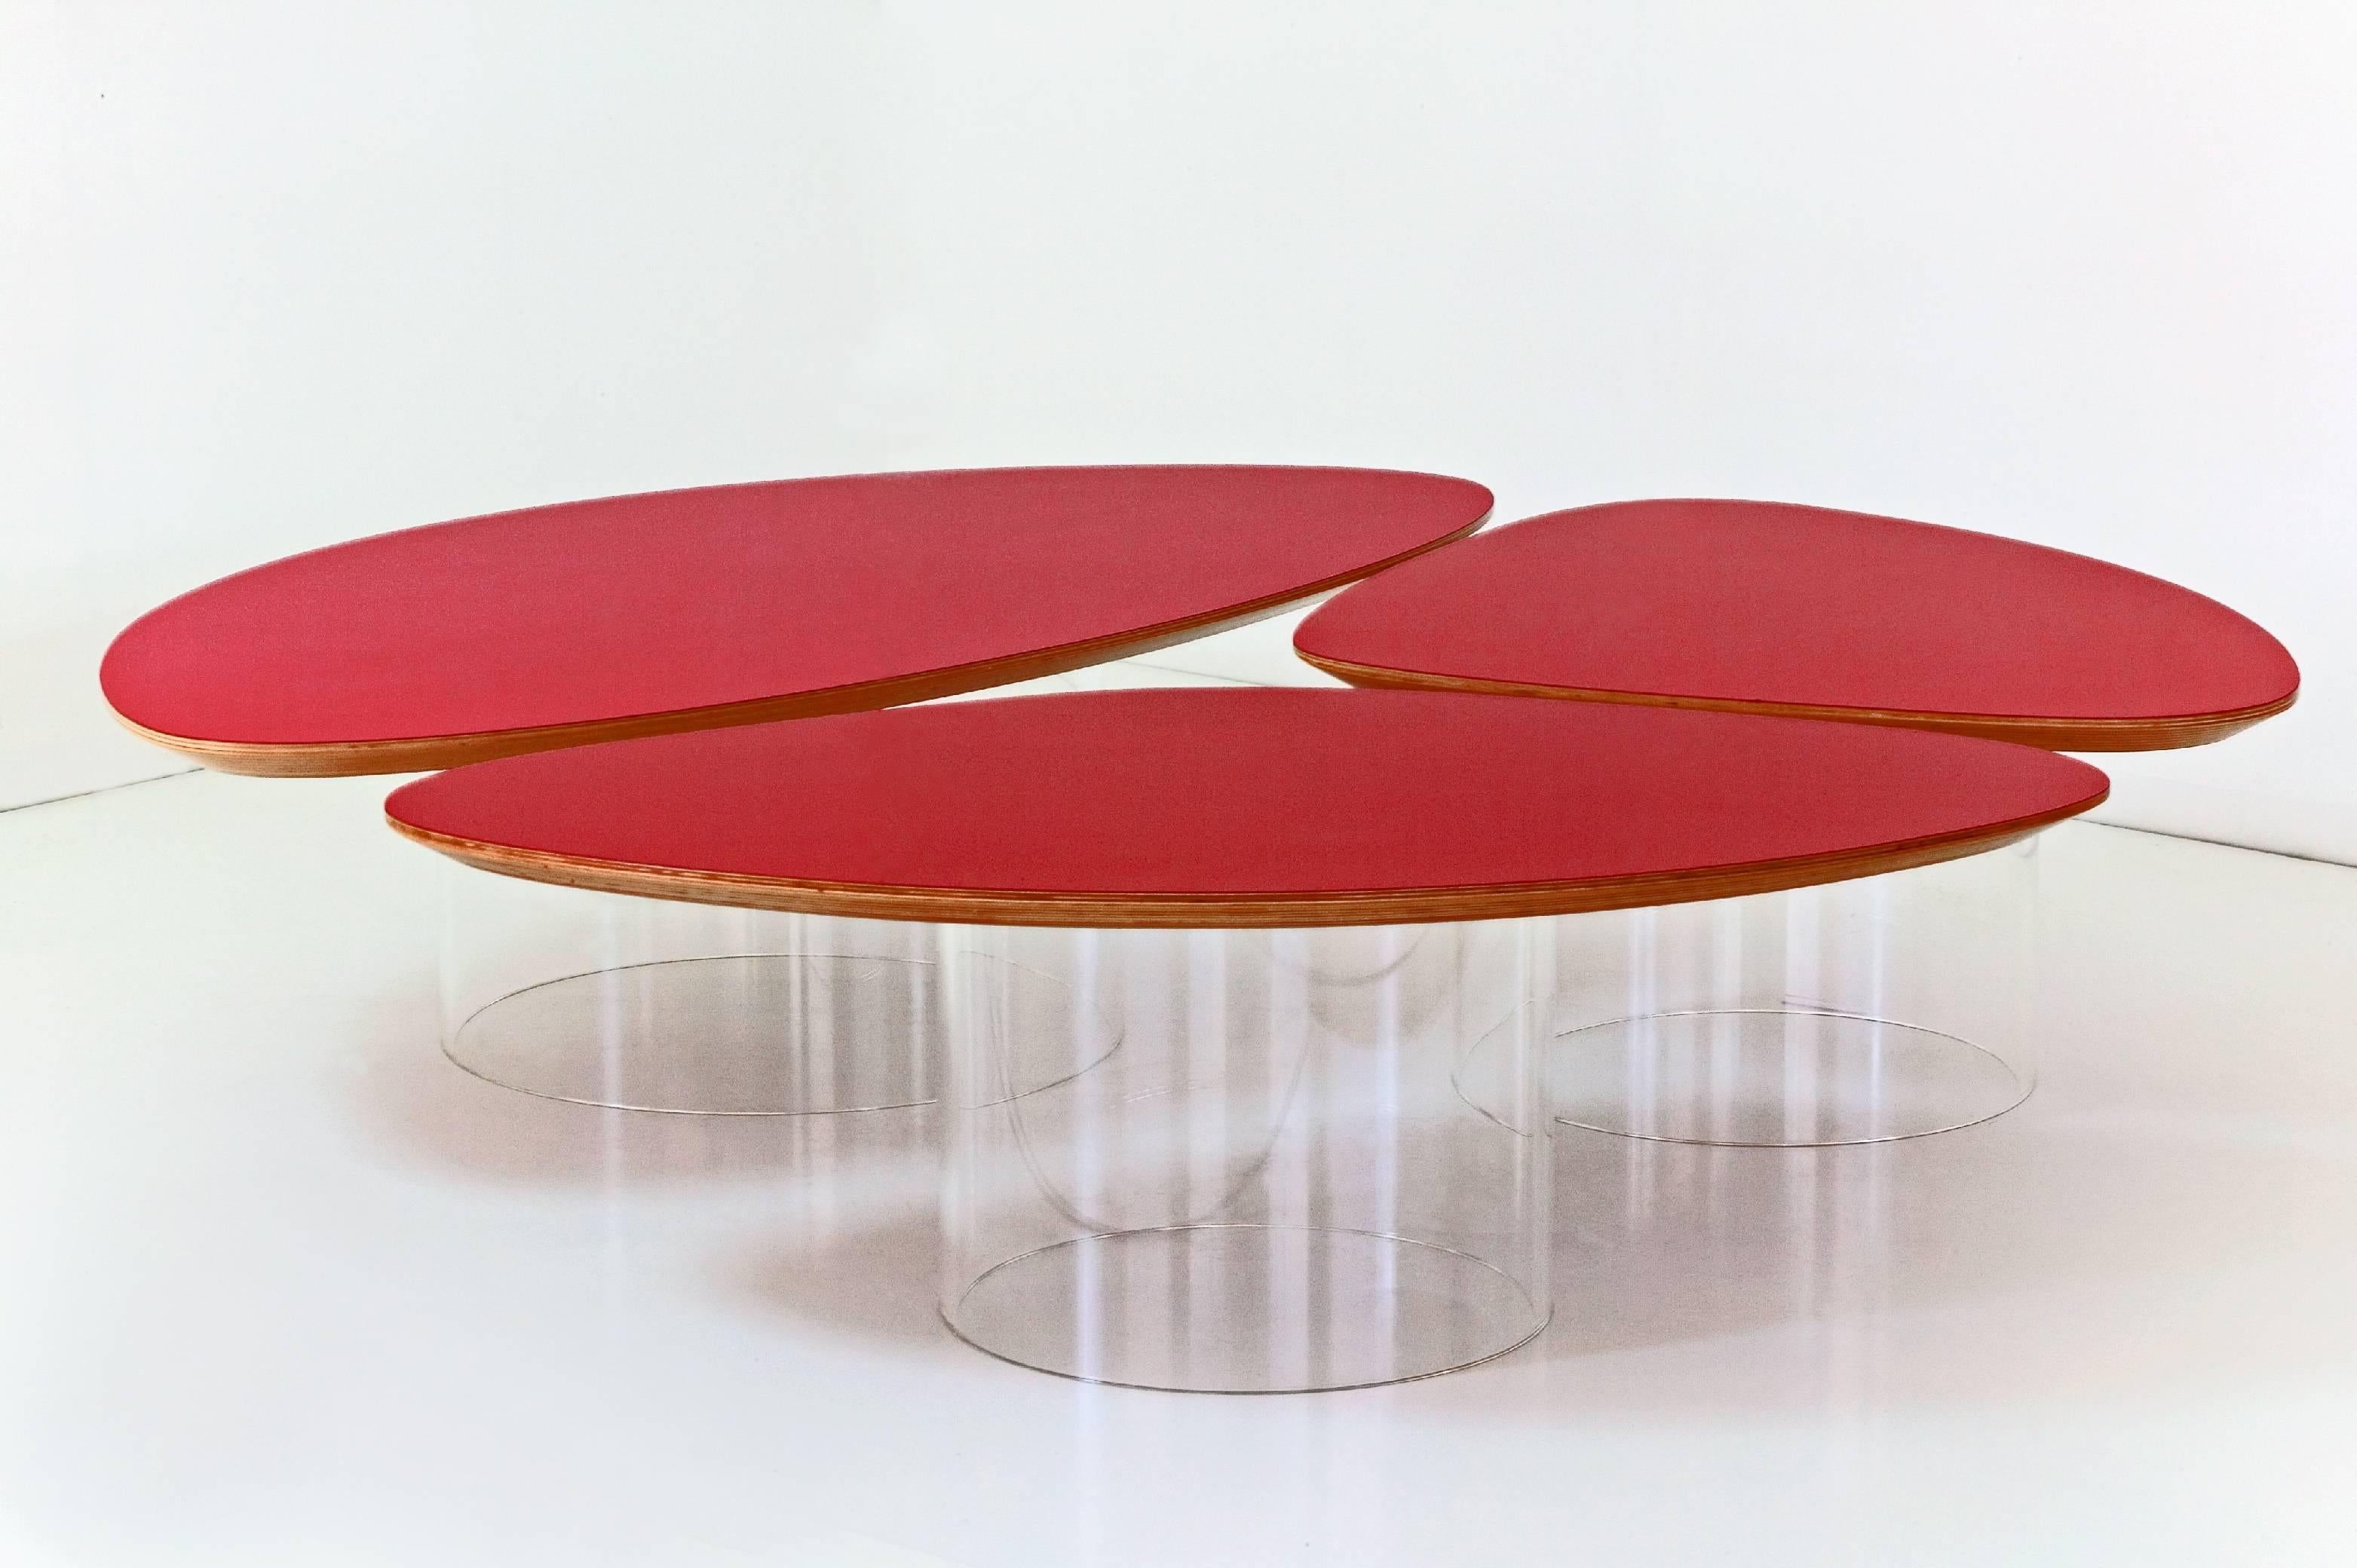 An exceptional piece. The 'edition zero' prototype for the re-issue of the iconic Nenuphar table in red was designed by Janette Laverriere in 1966. This re-edition was built under the supervision of Laverriere in collaboration with Perimeter